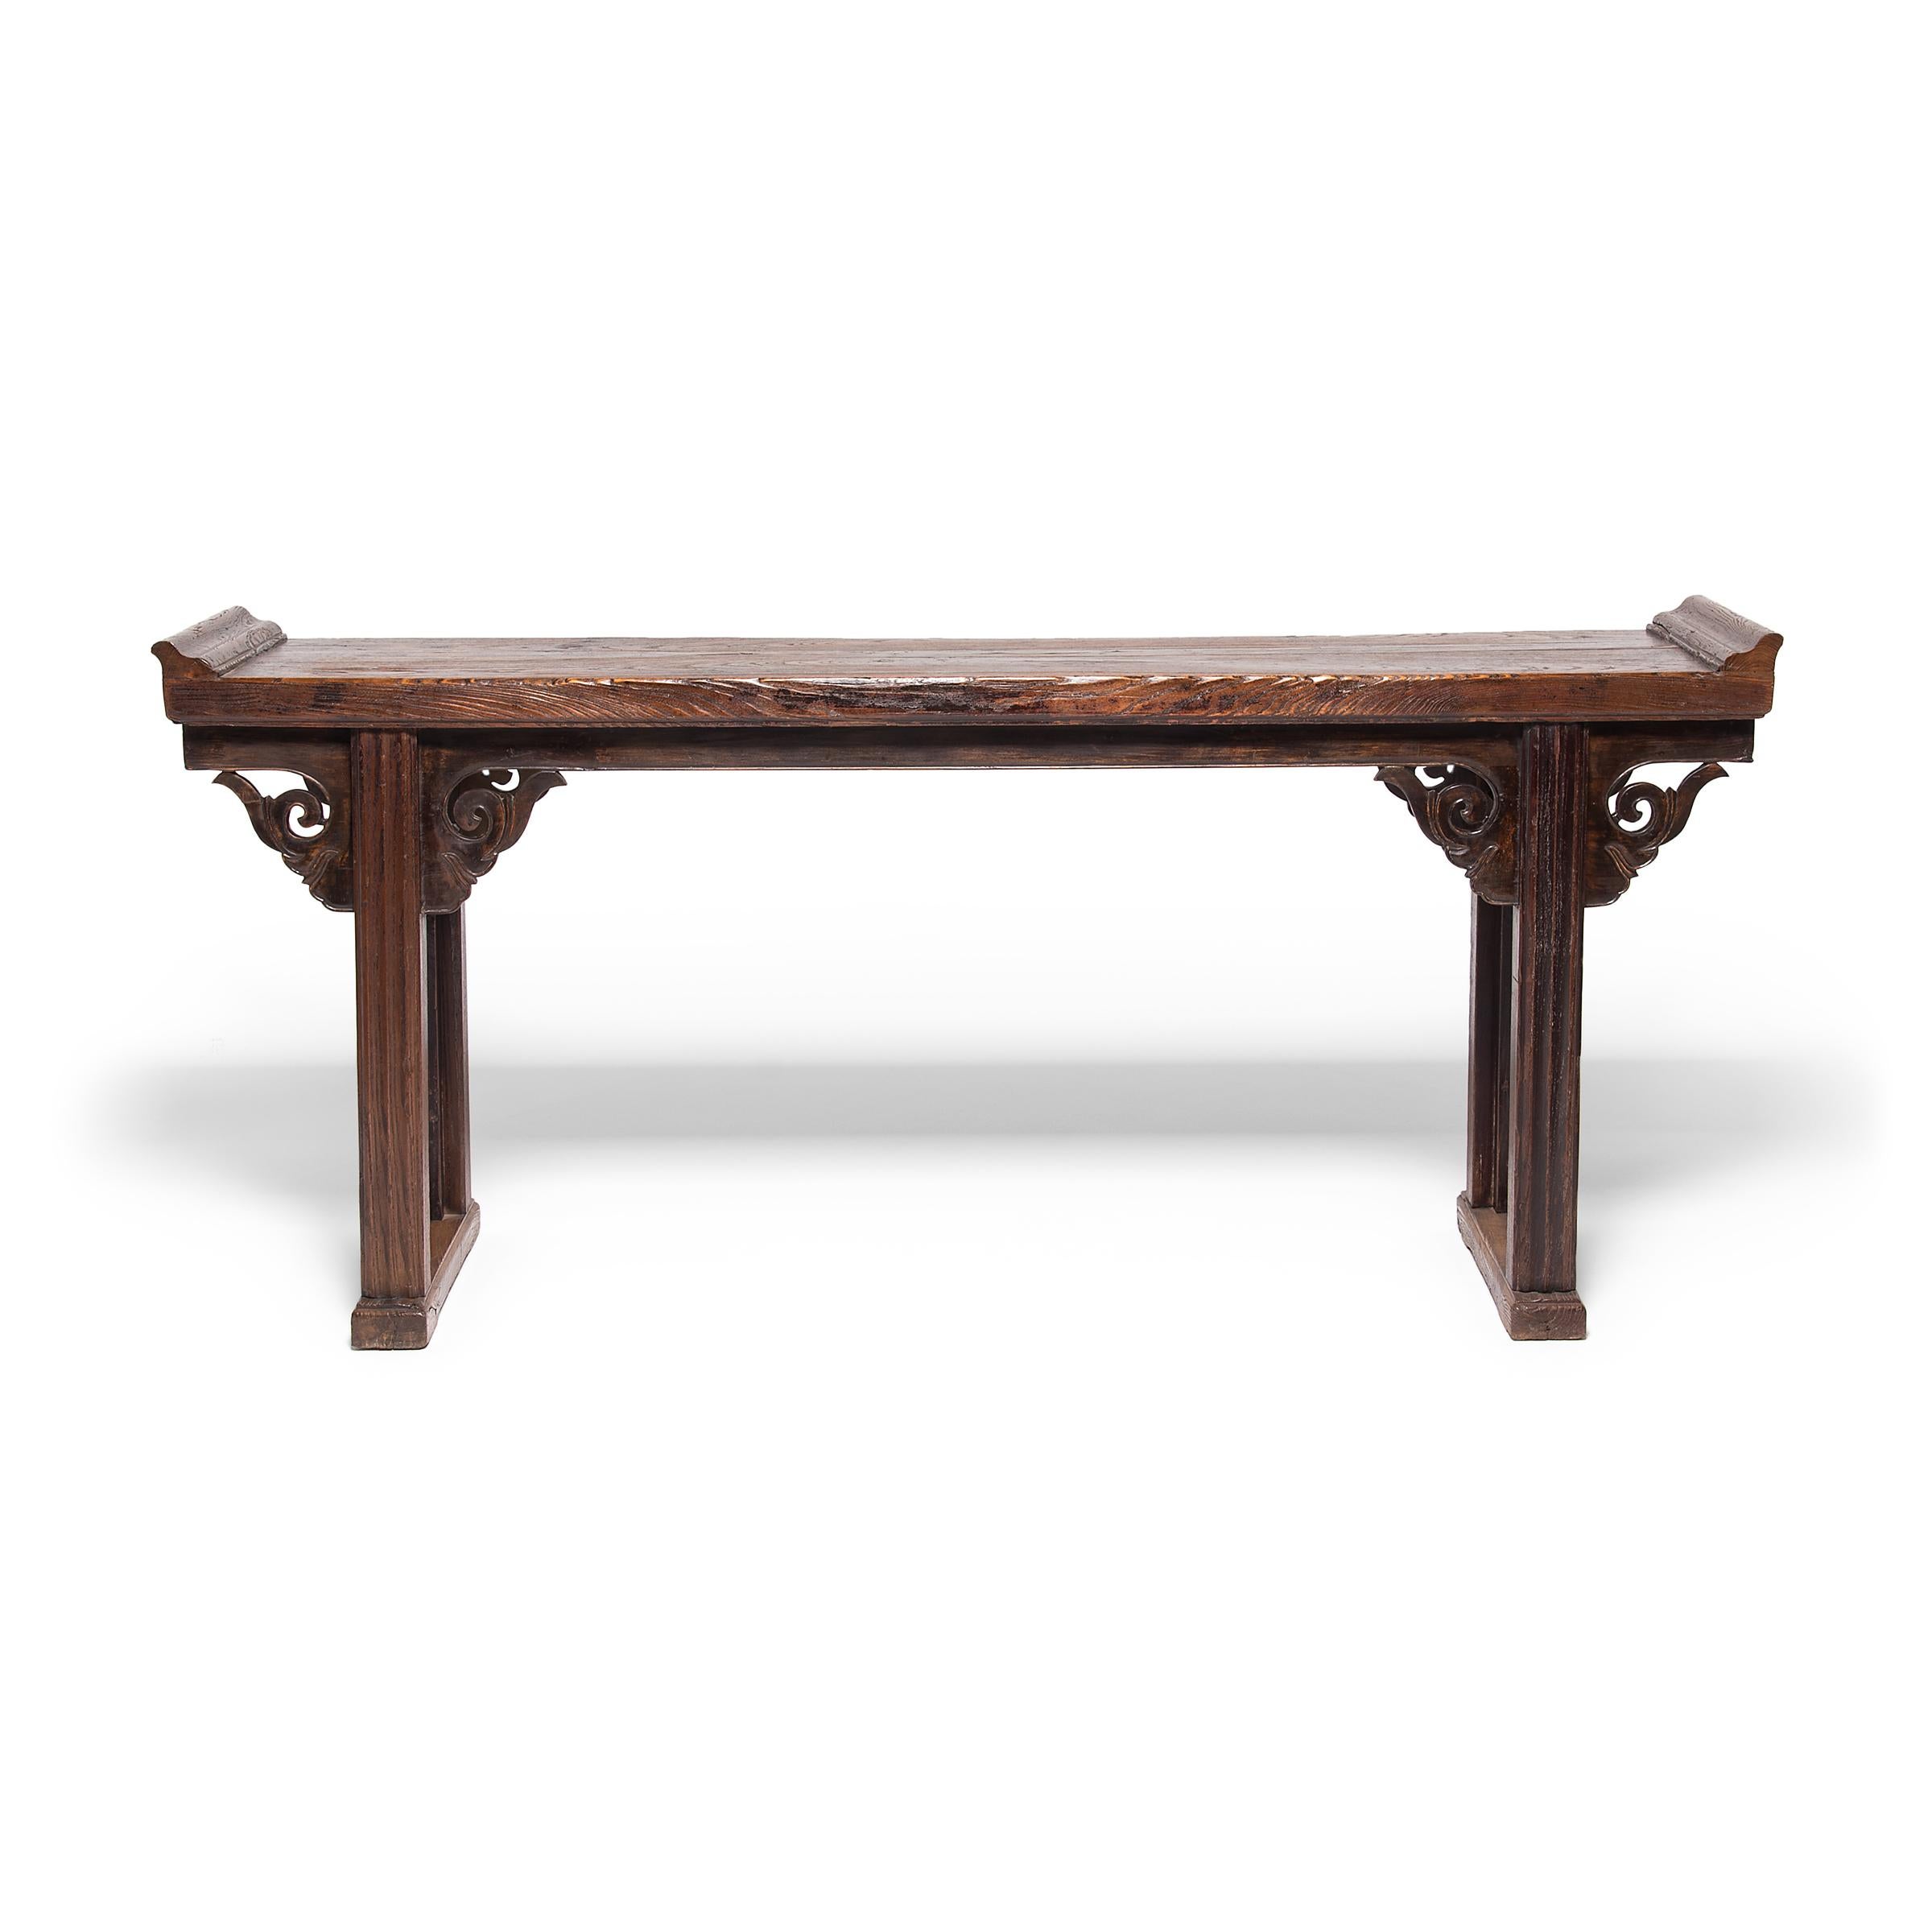 With everted ends and square legs, this altar table expresses Classic Qing-dynasty design, but the hand-carved spandrels are extraordinary and truly set the design apart. Trimmed with a finely beaded edge, the spandrels are carved with a scrolled